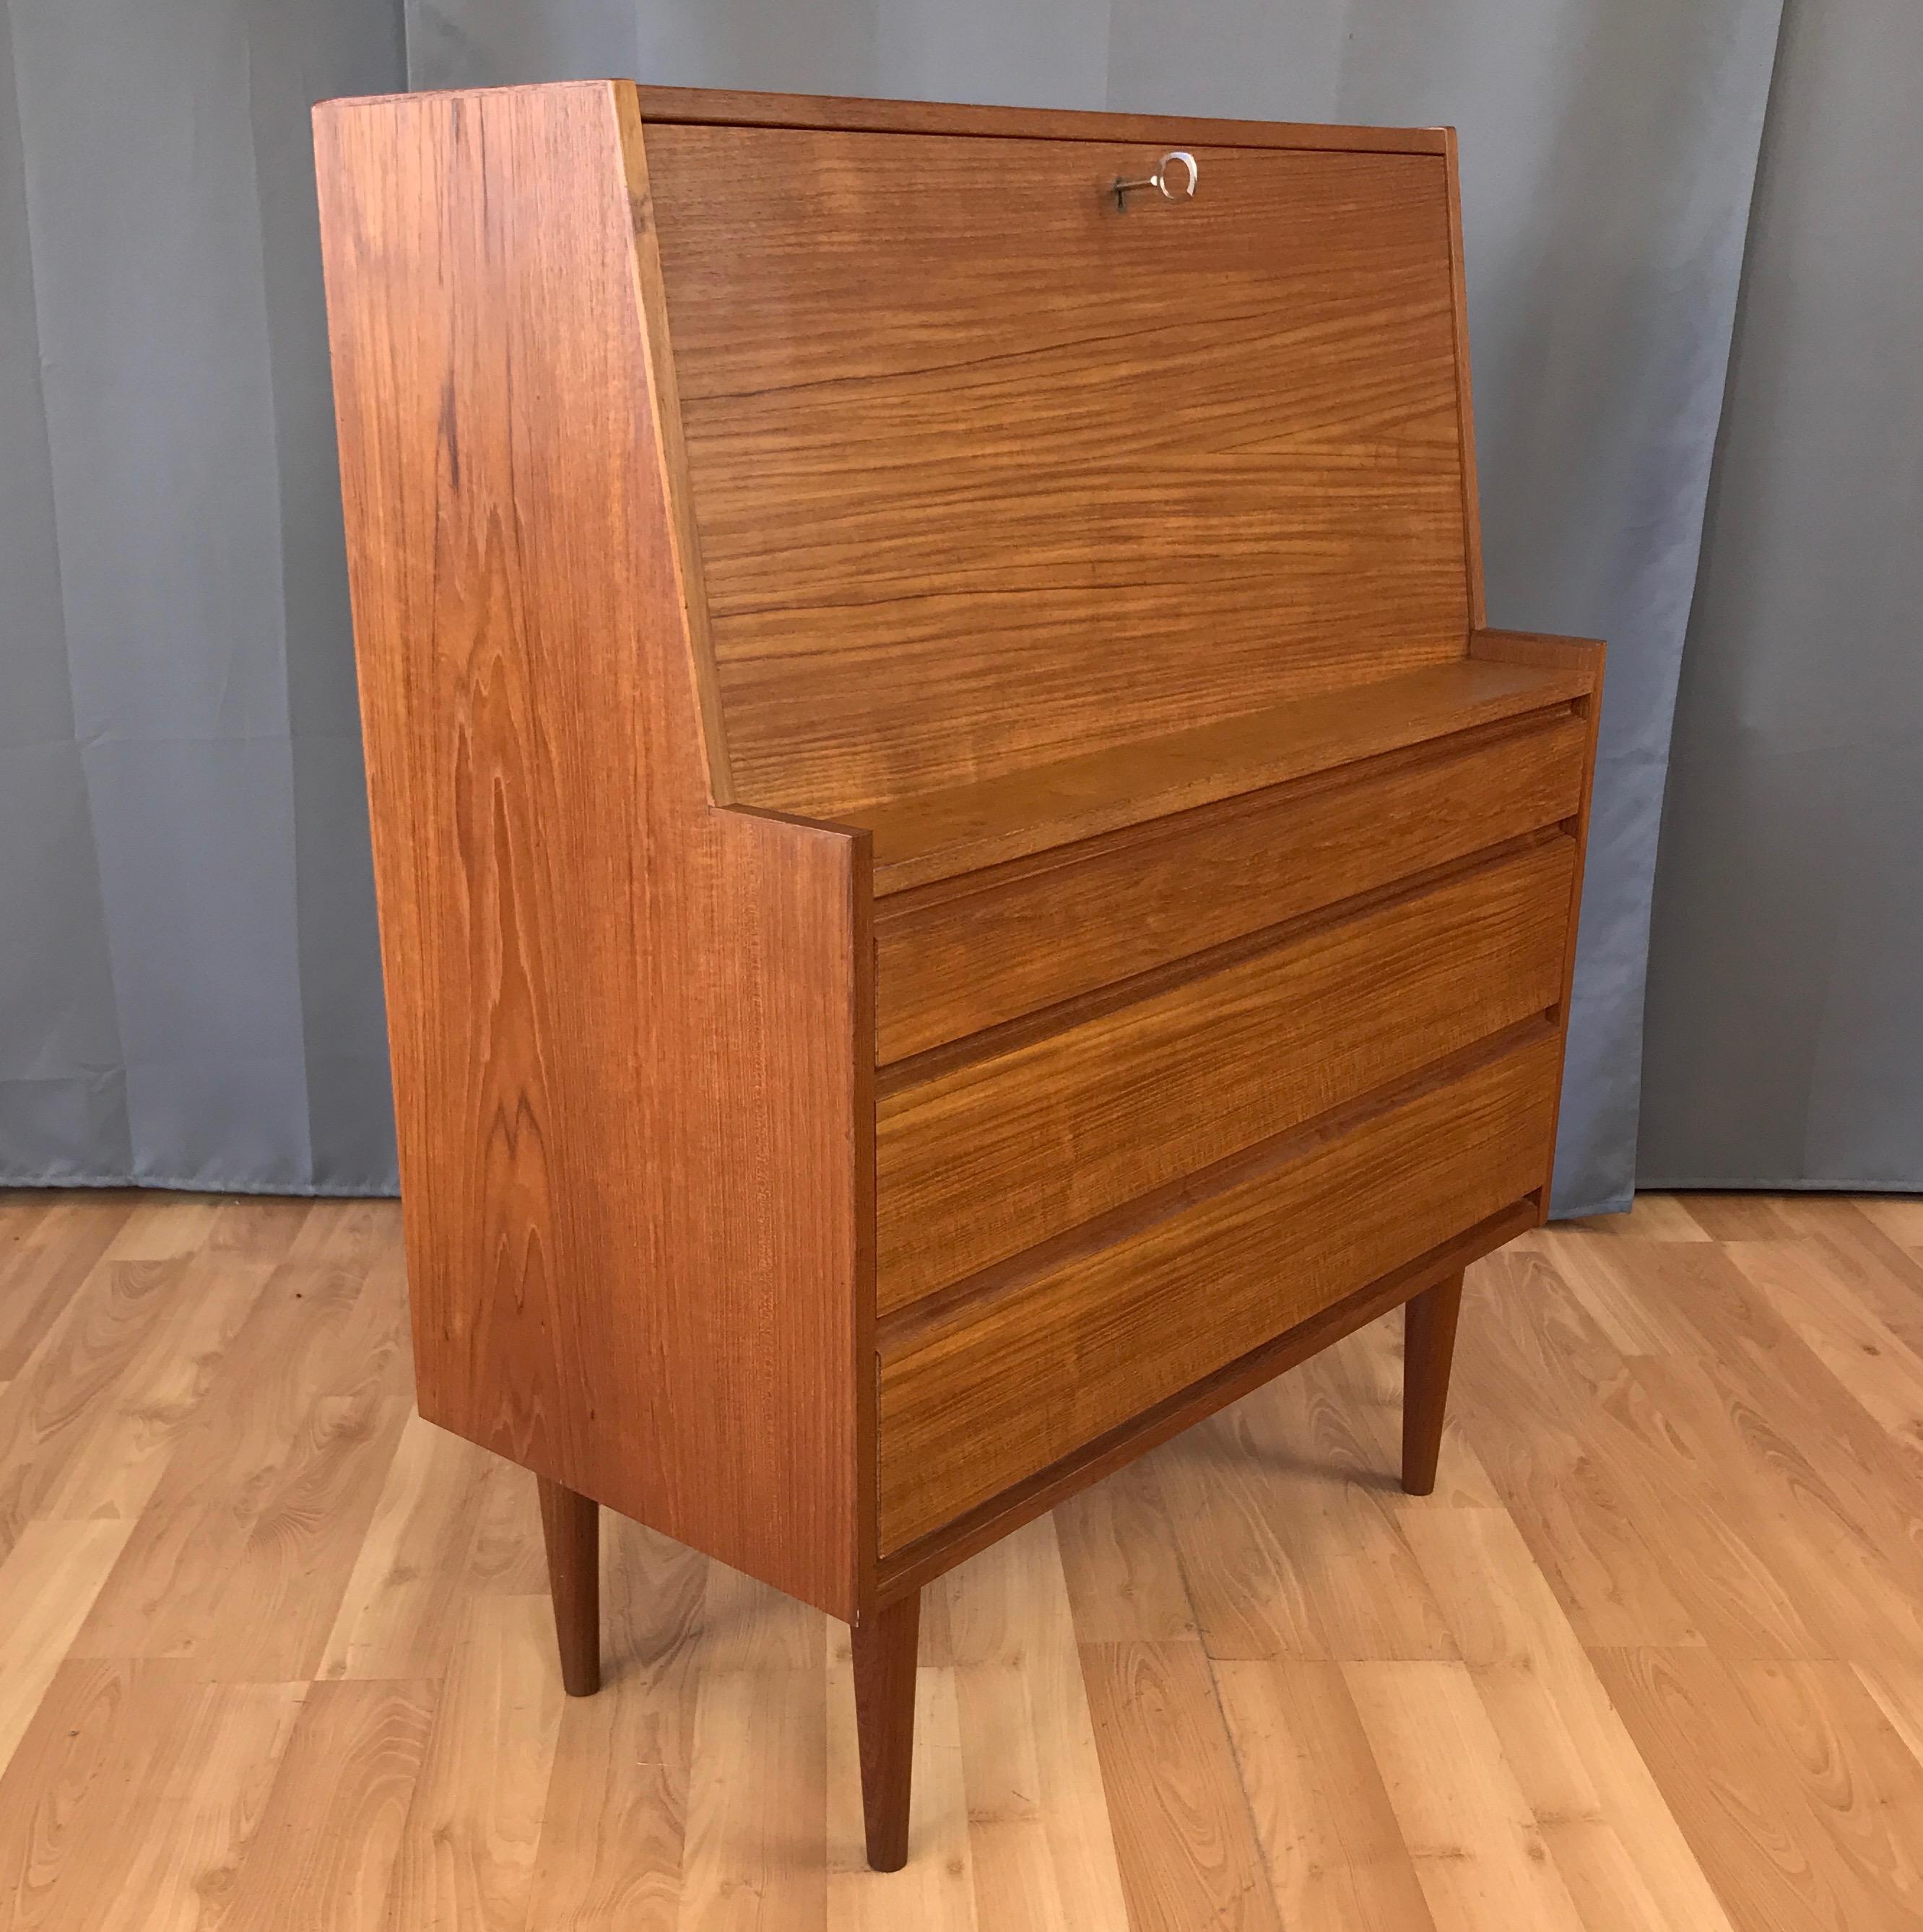 A Danish Modern lockable teak secretary, circa late 1960s to early 1970s.

Compact design with clean lines and beautiful bookmatched teak. Three wide drawers with dovetail joinery and nicely finished interiors. Lockable drop-down front with